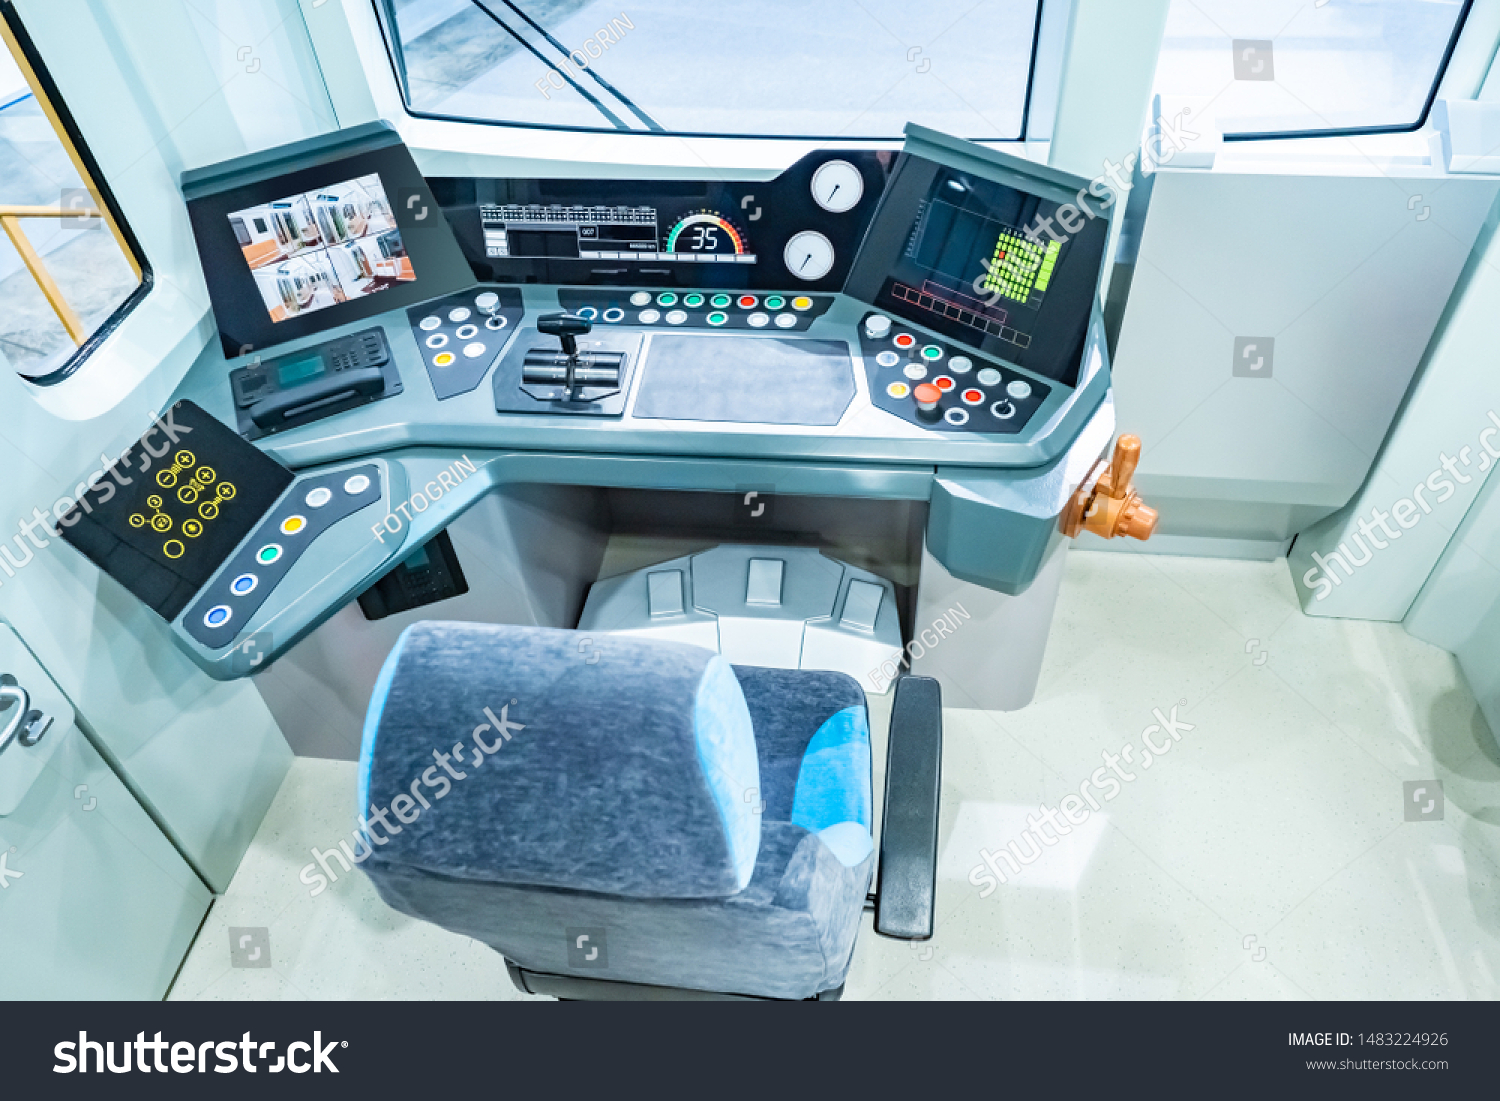 The cabin of the electric train. Driver place of the electric train. Dashboard. The control cabin of the electric train. Railway suburban transport. Passenger transport. Suburban transport network. #1483224926